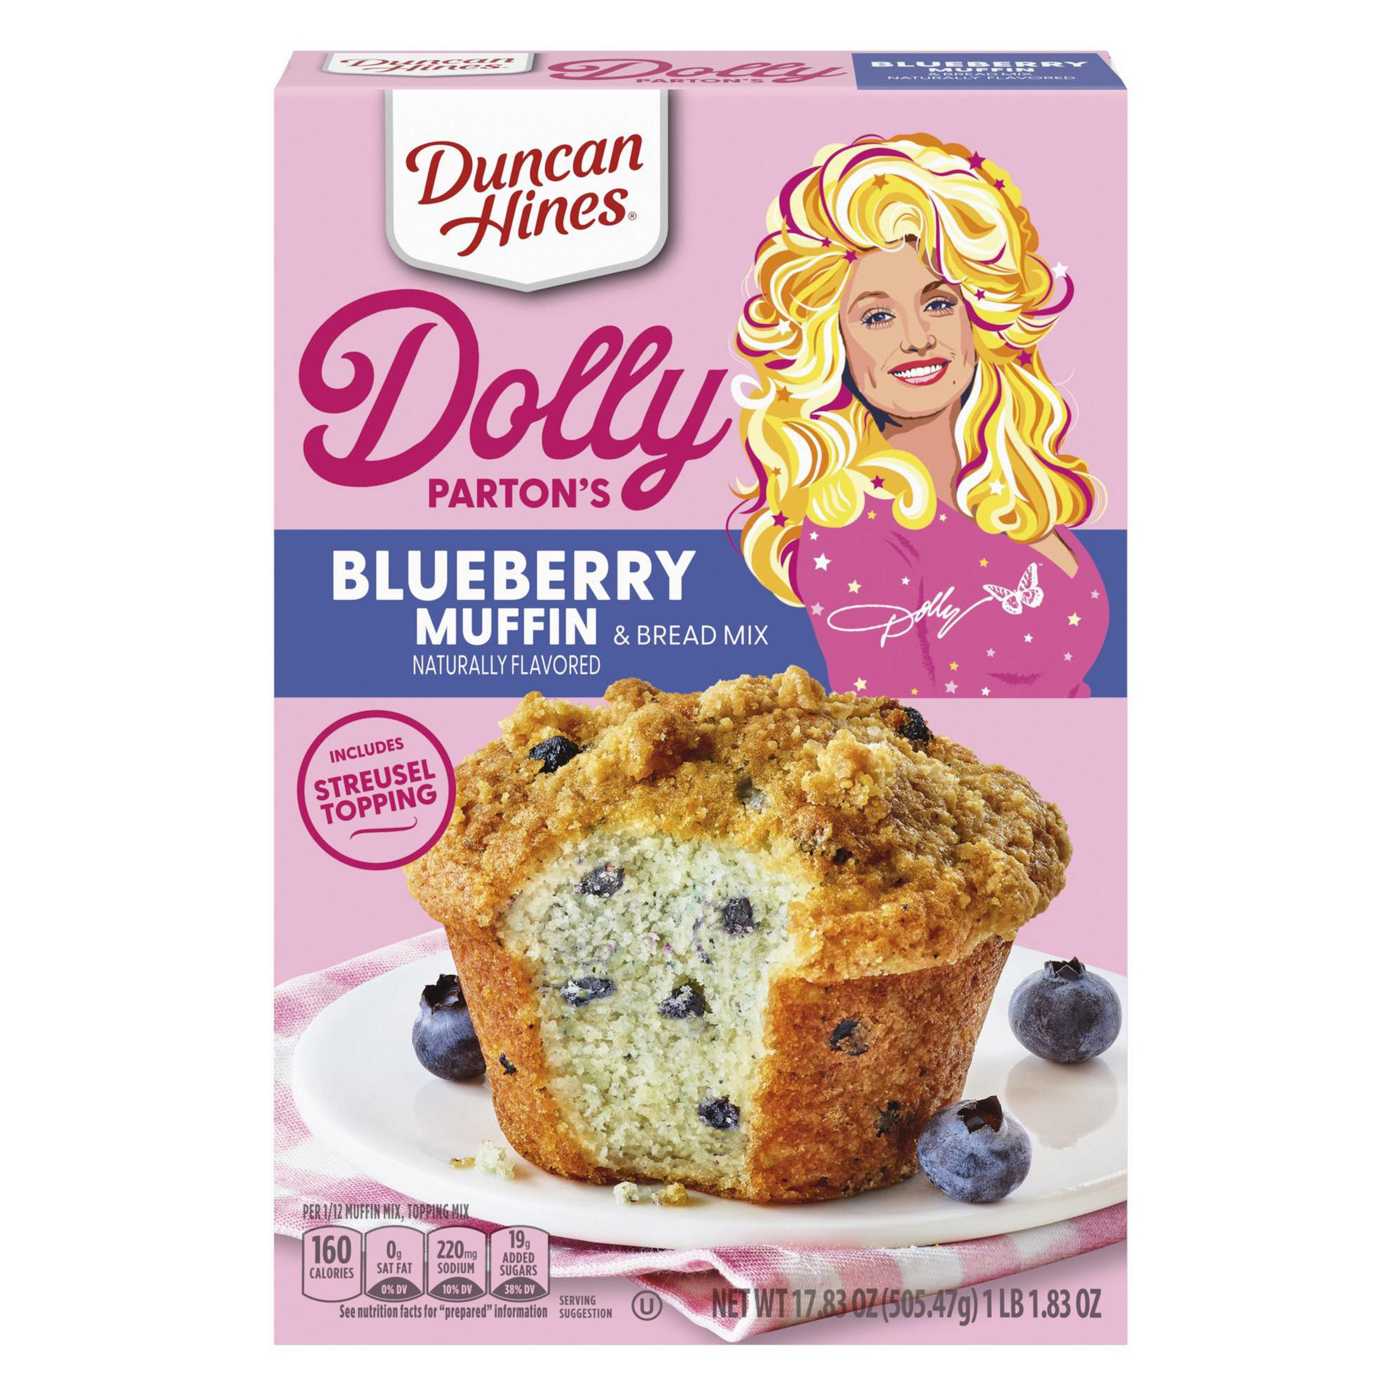 Duncan Hines Dolly Parton's Blueberry Muffin Mix; image 1 of 4